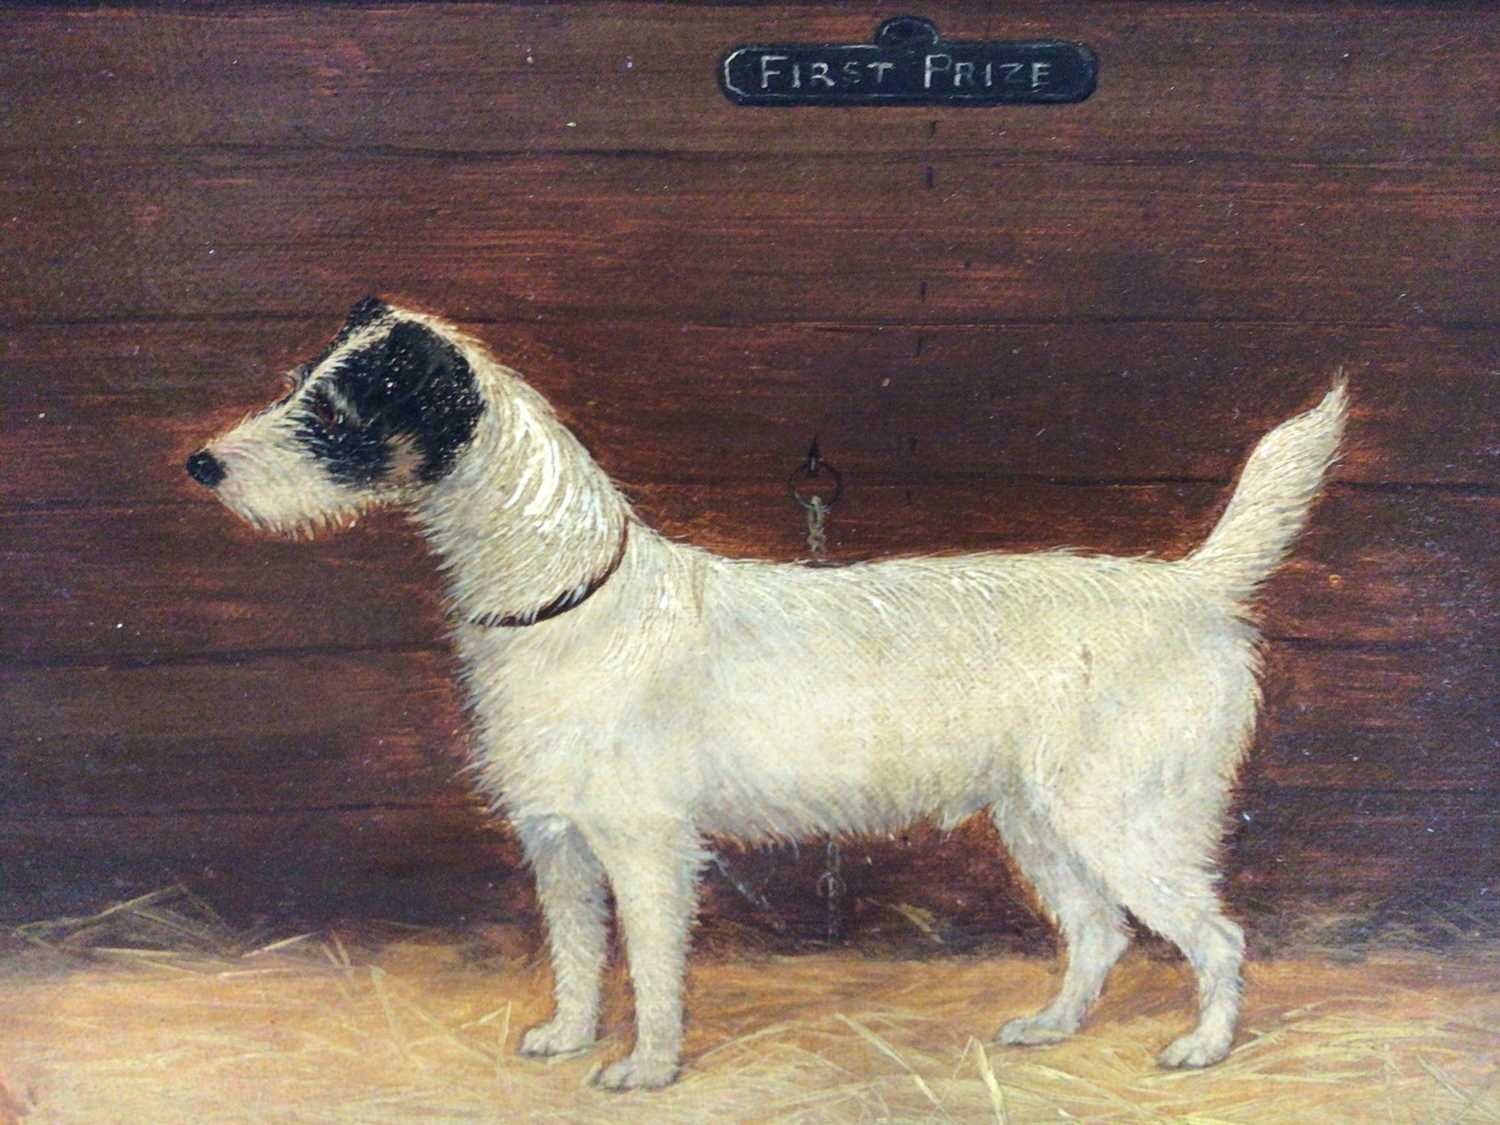 Lot 50 - English School 19th Century, "First Prize", a study of a terrier, oil on board, inscribed, in gilt frame. 18 x 22cm.